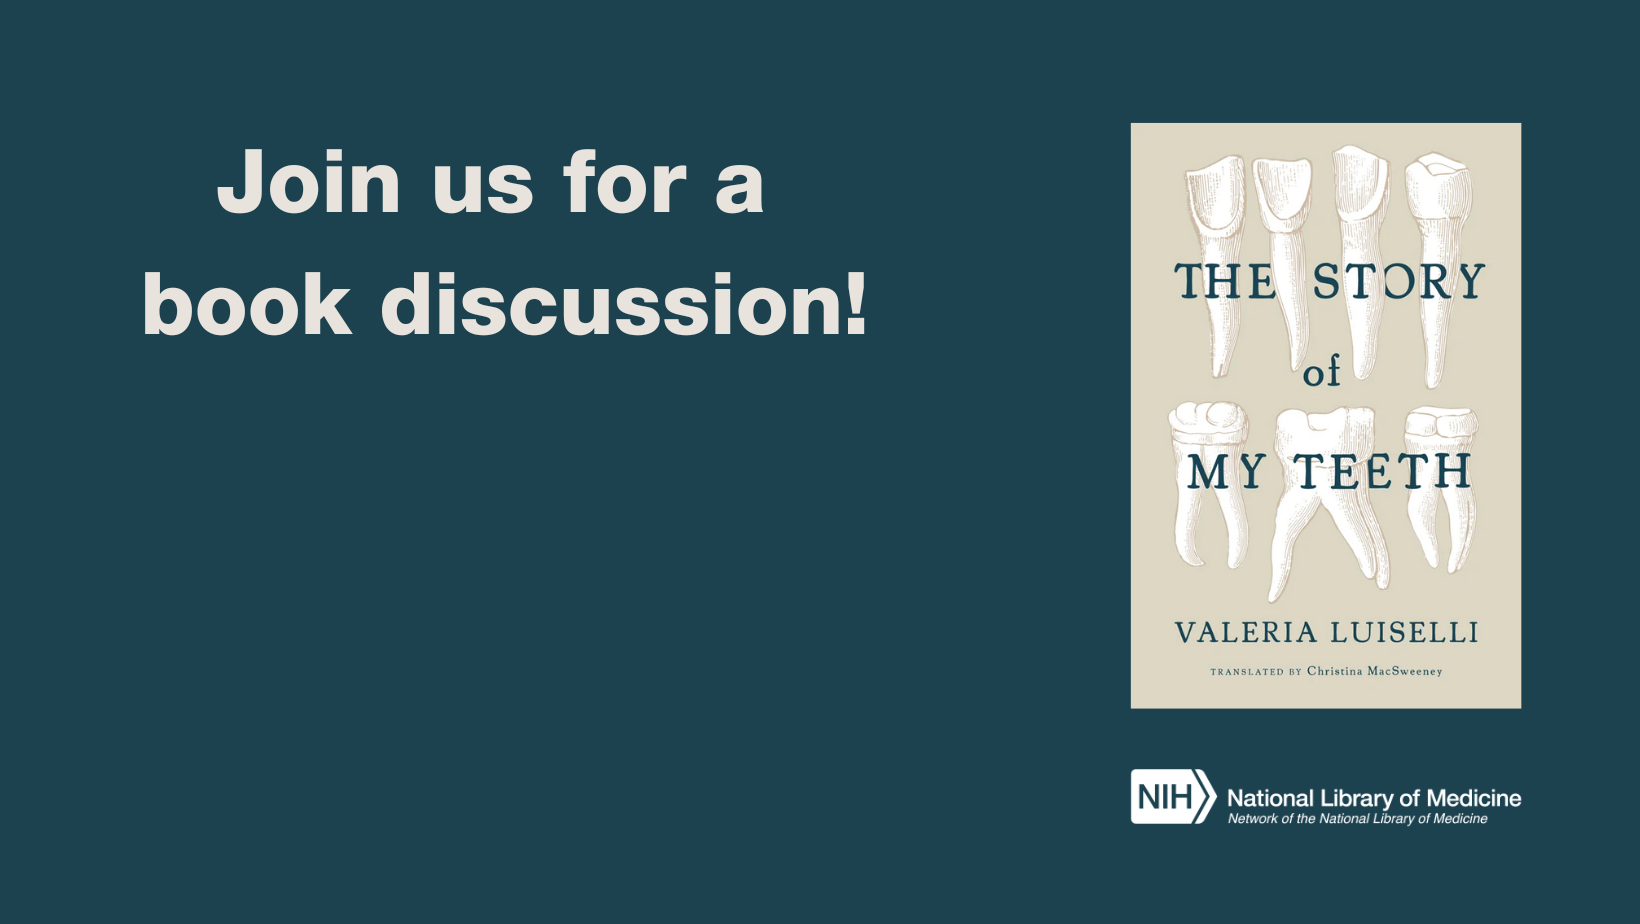 Join us for a book discussion of the Story of My Teeth social media graphic